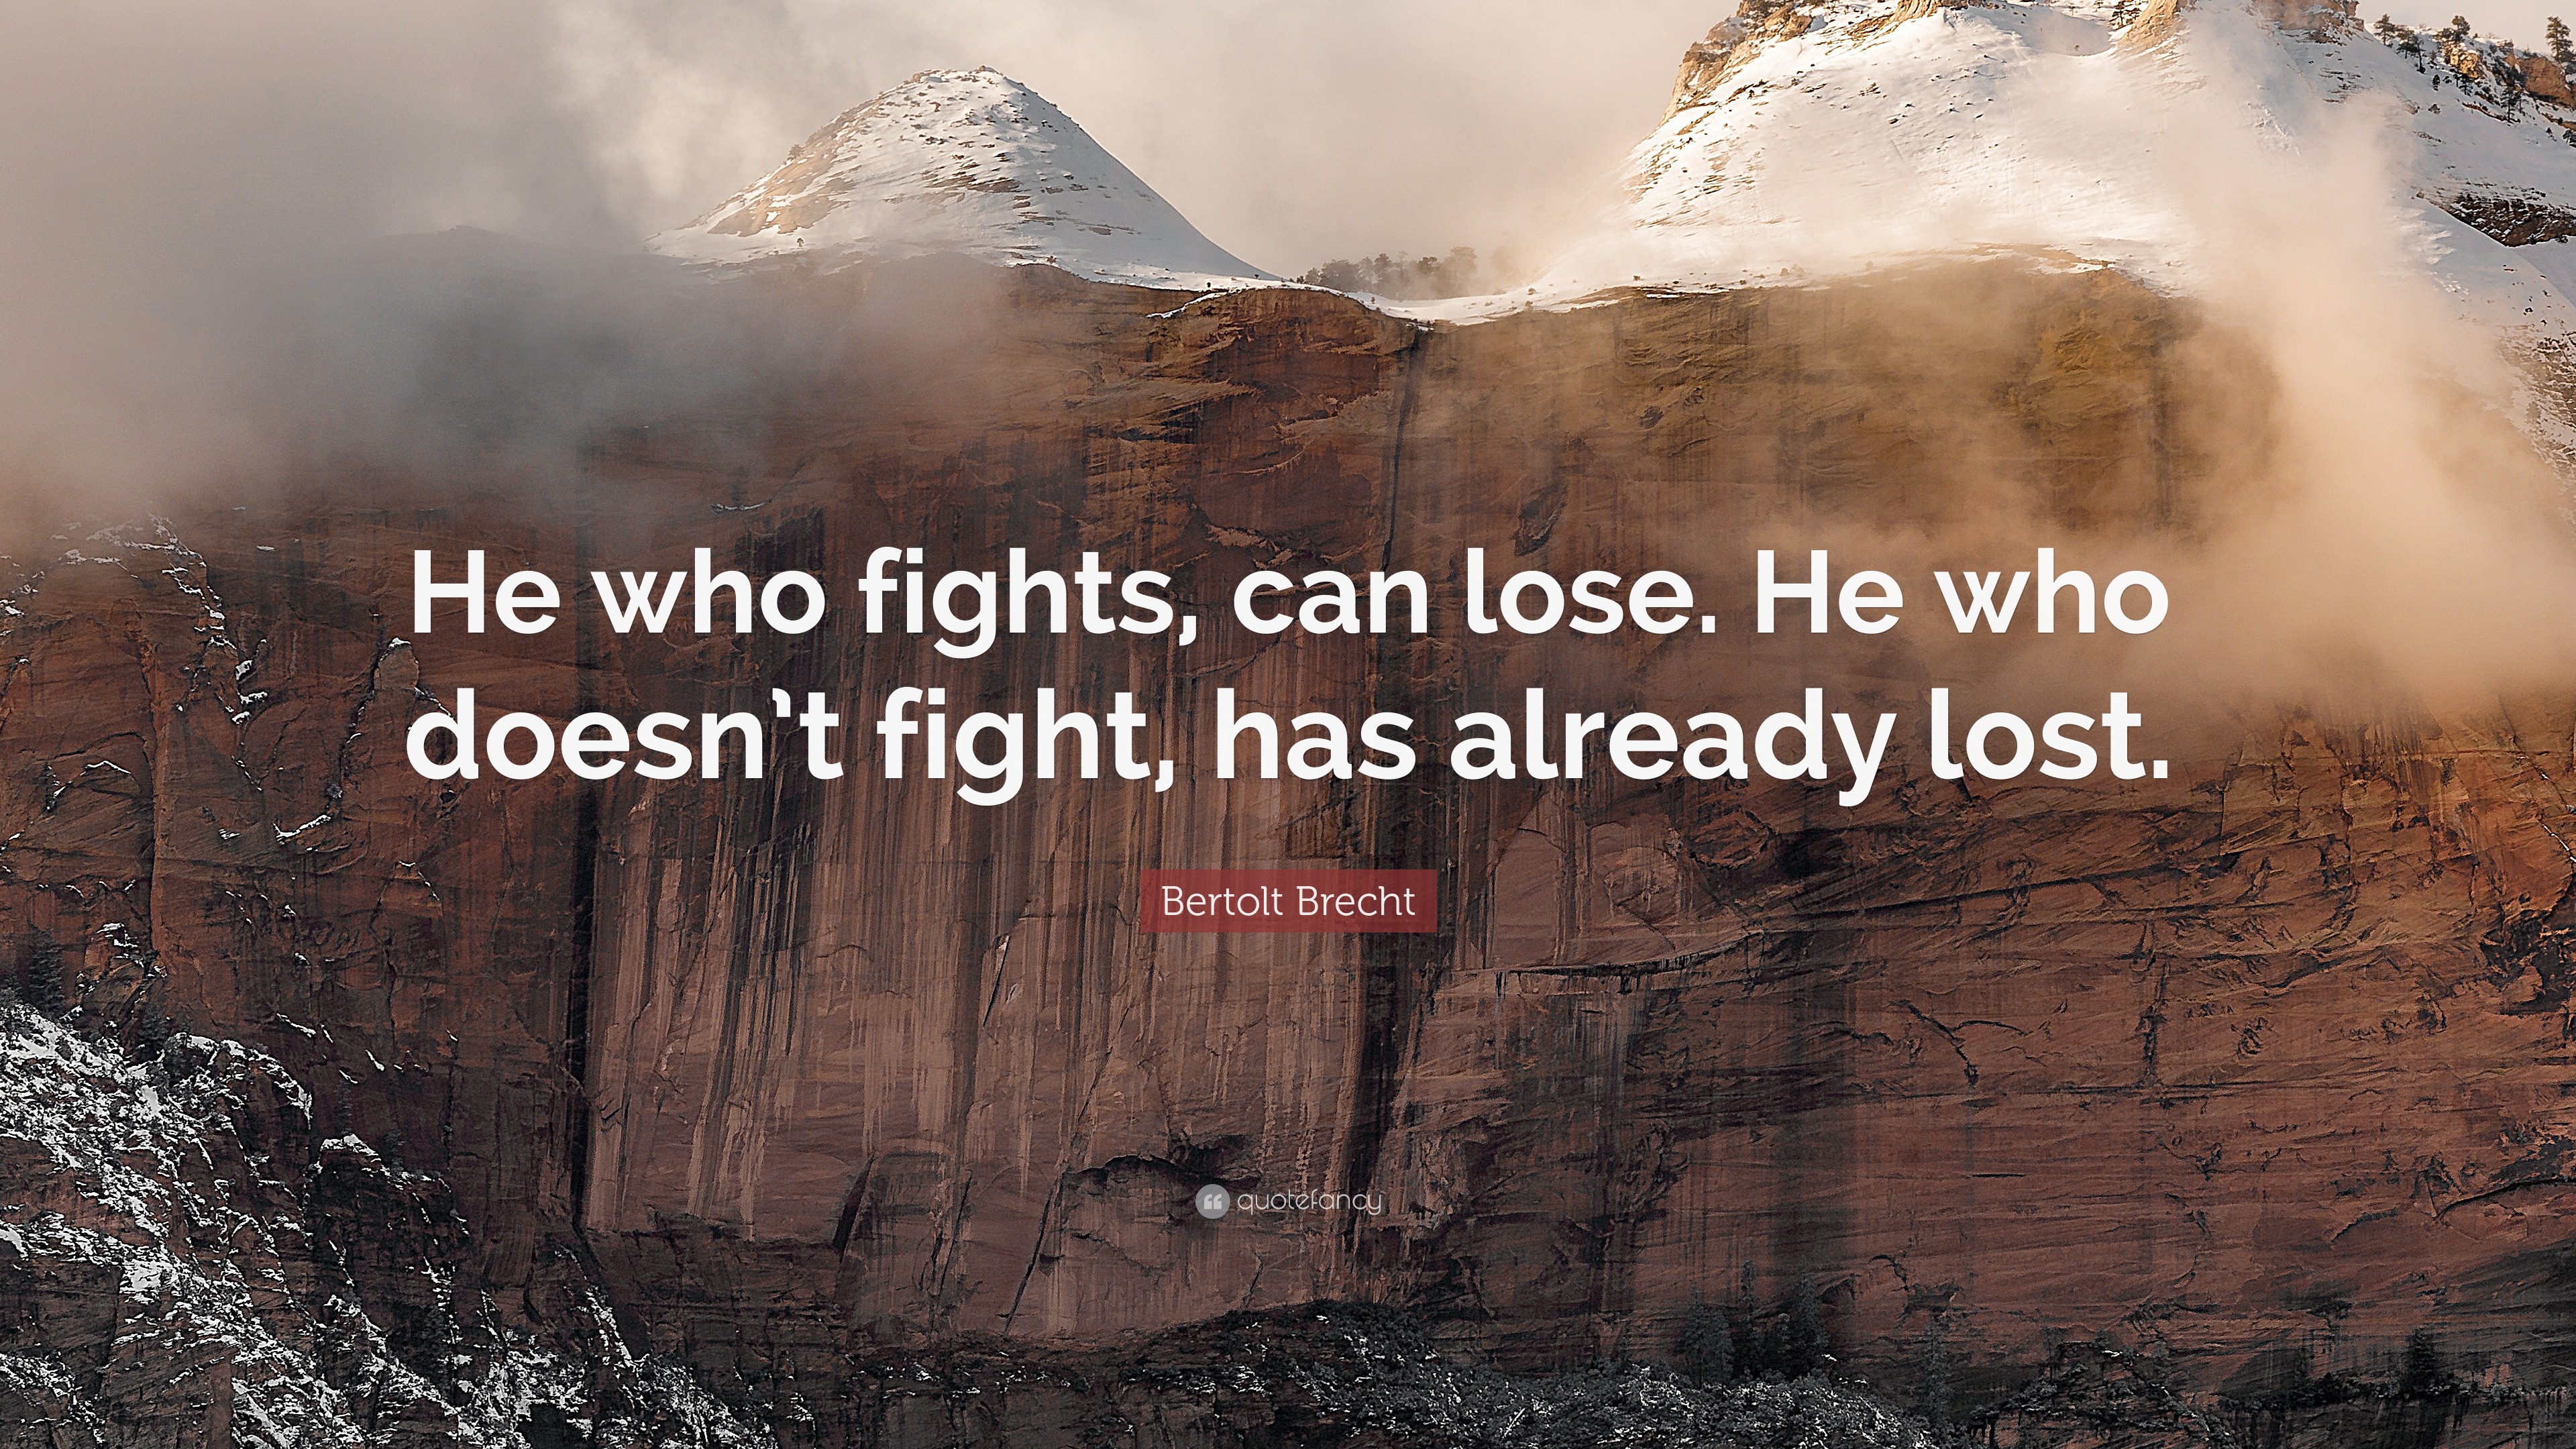 Bertolt Brecht Quote: “He who fights, can lose. He who doesn’t fight, has already ...3840 x 2160